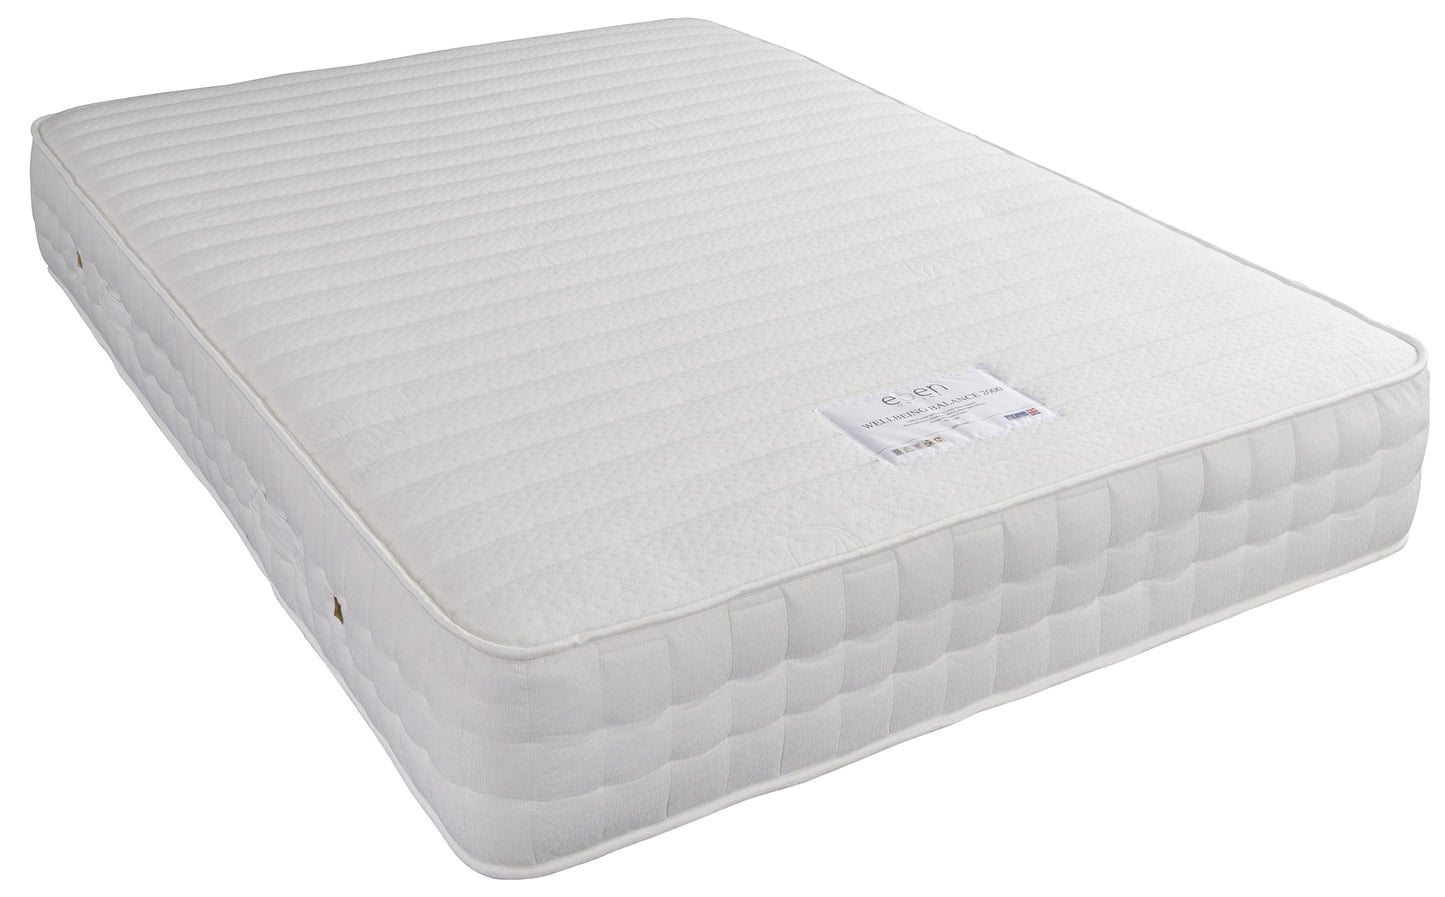 Sweet Dreams Balance mattress. Fast delivery available.